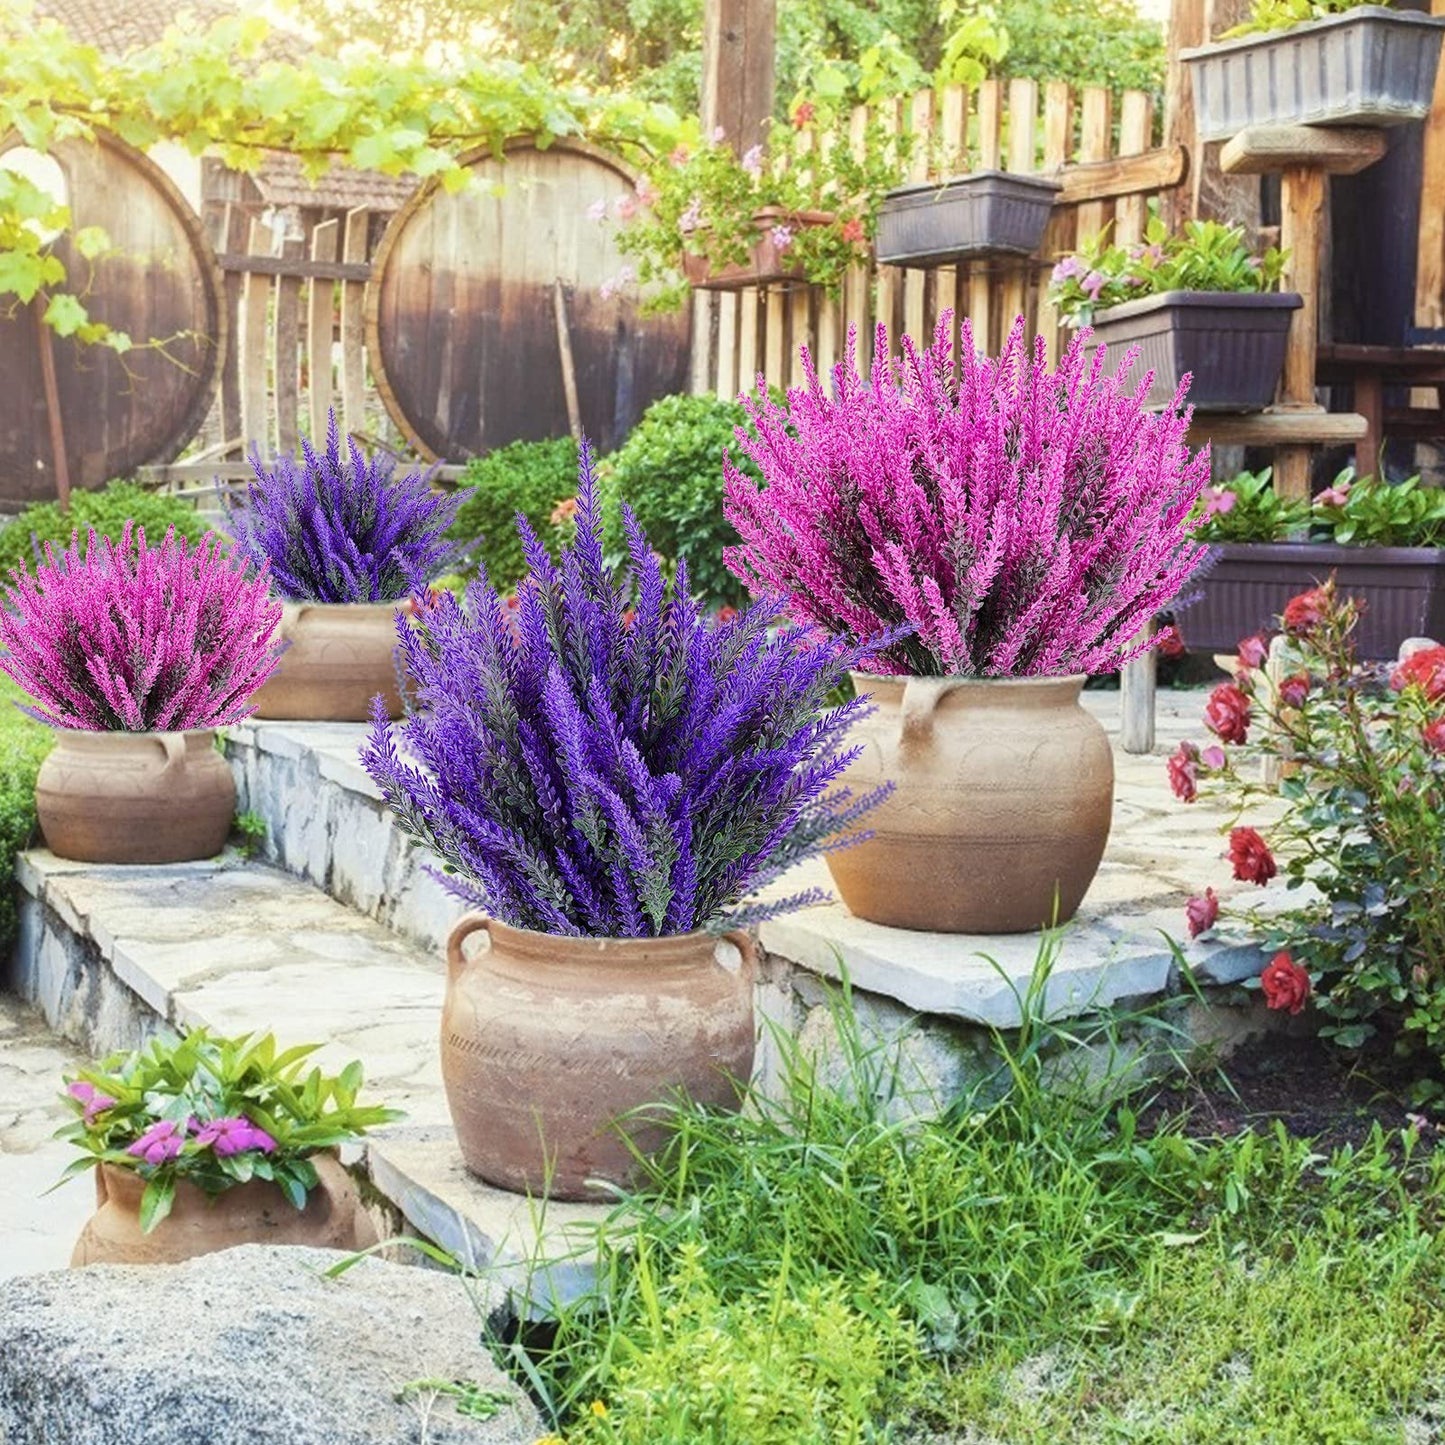 🌸50% OFF-Outdoor Artificial Lavender Flowers💐